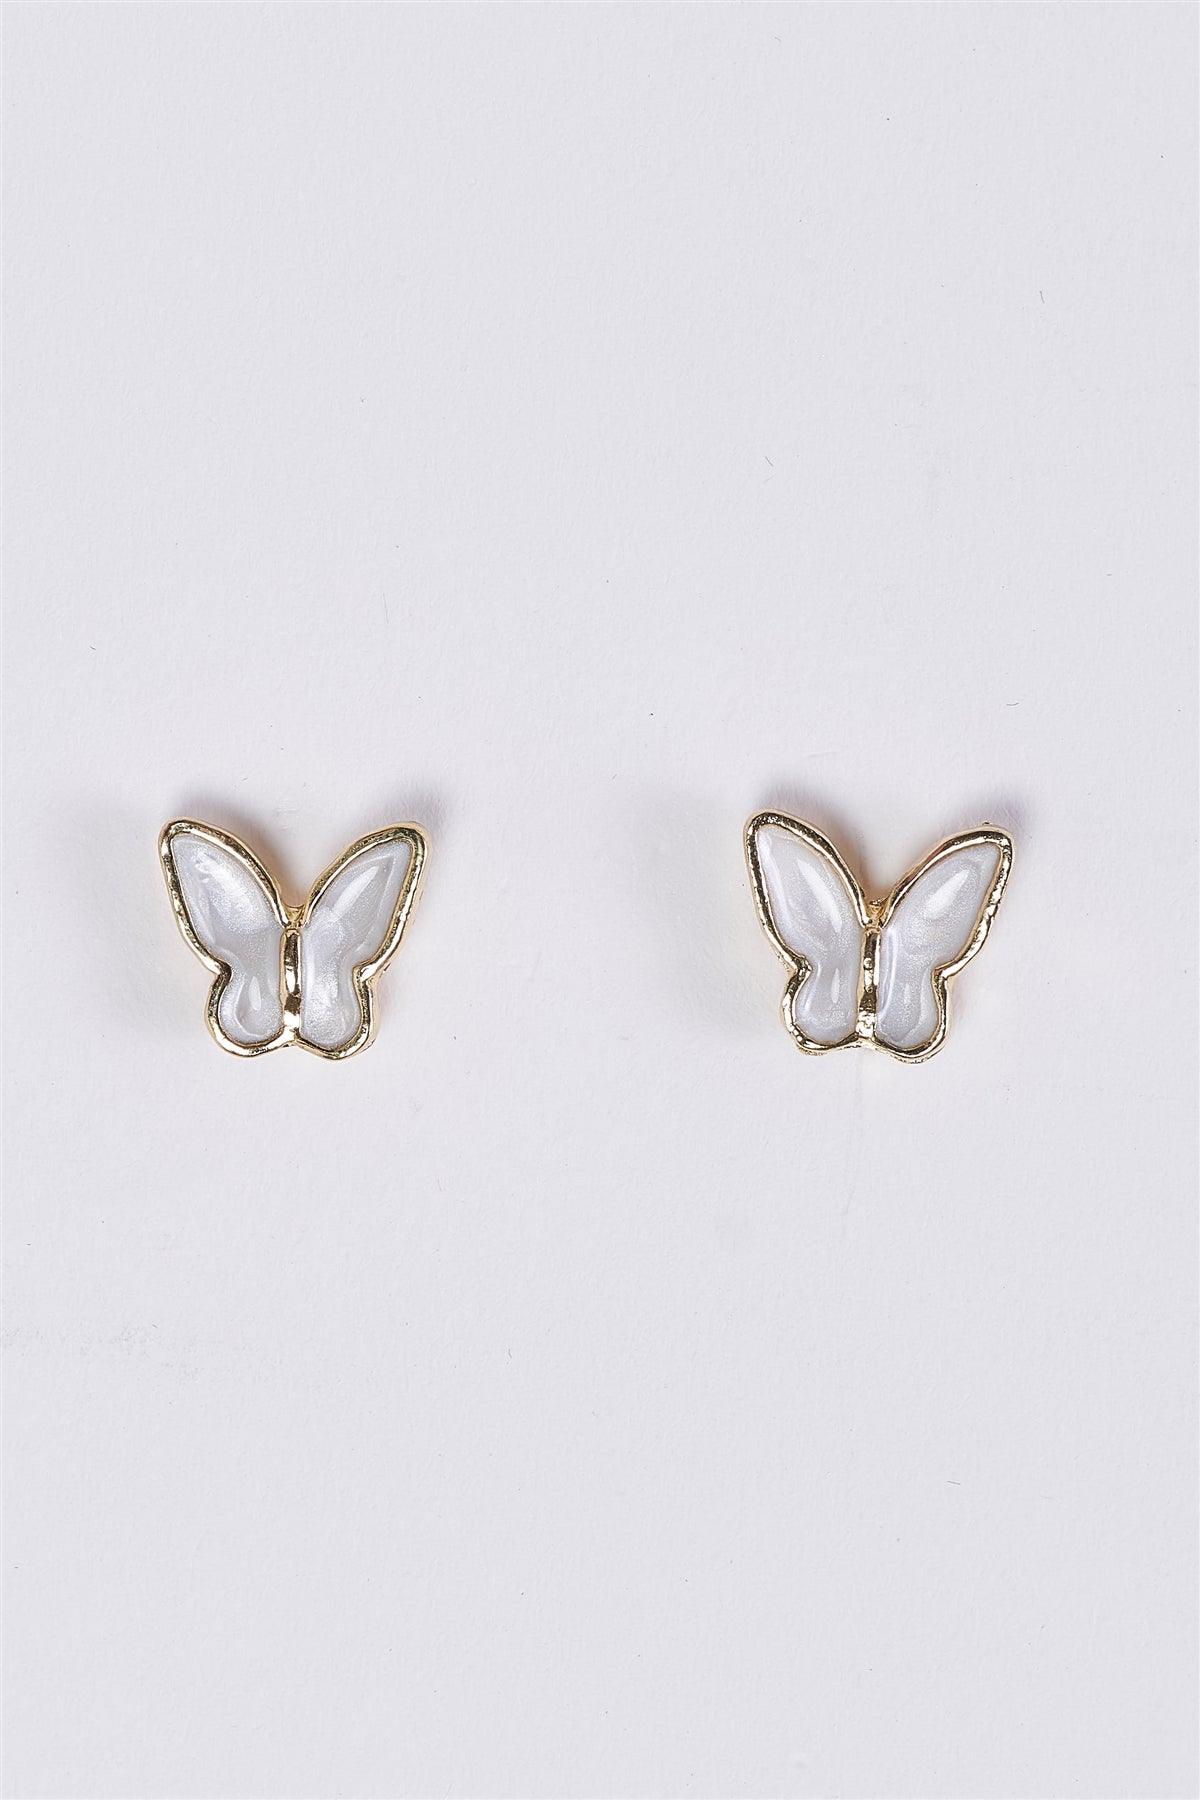 Gold & White Butterfly Shaped Stud Earrings /3 Pairs